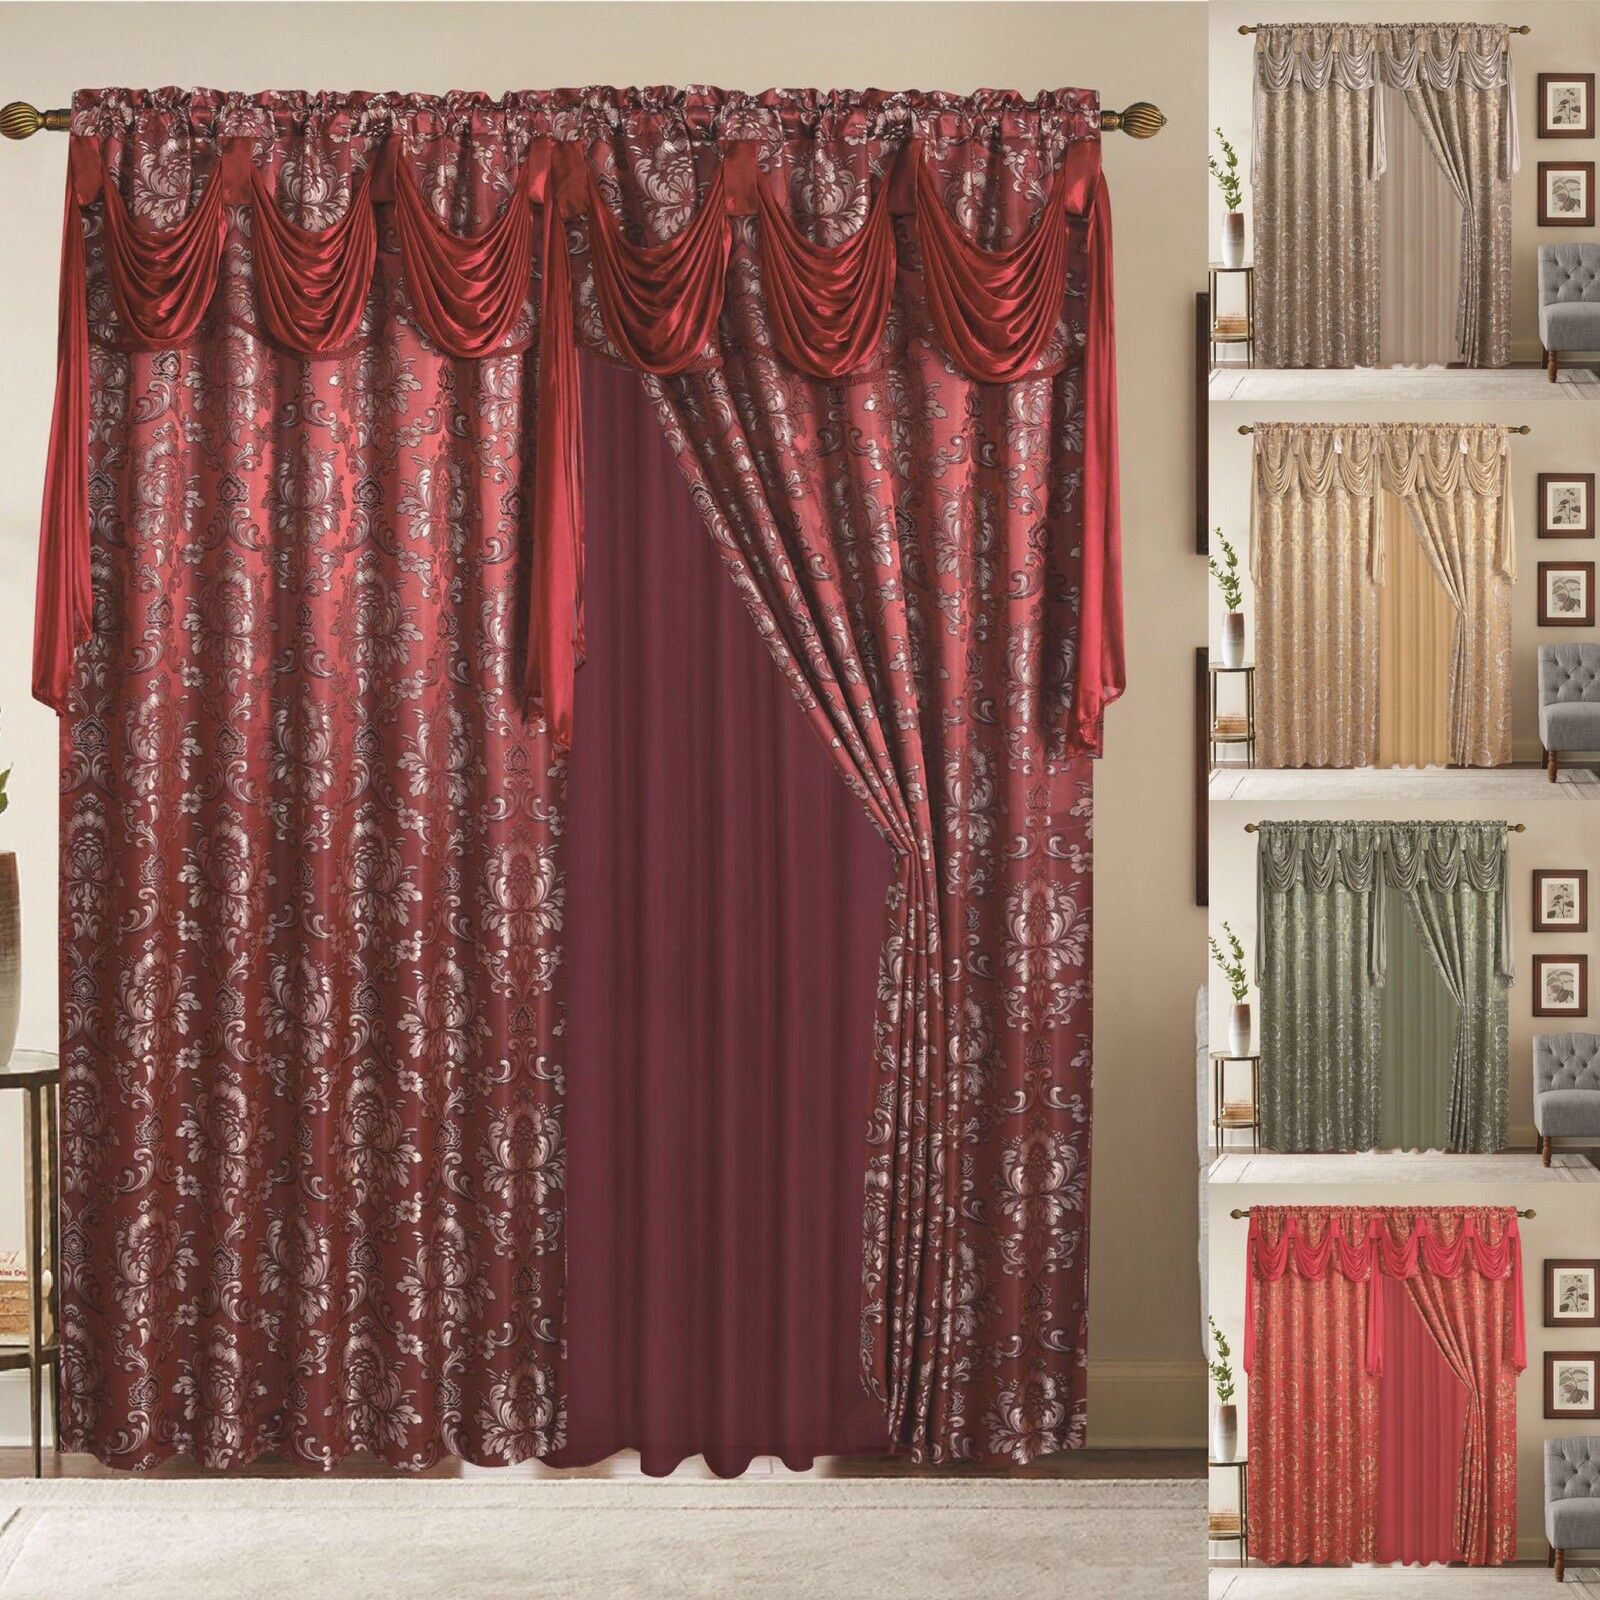 Window Curtains 2 Panel Set Luxury Red Burgundy With Valance And Sheer